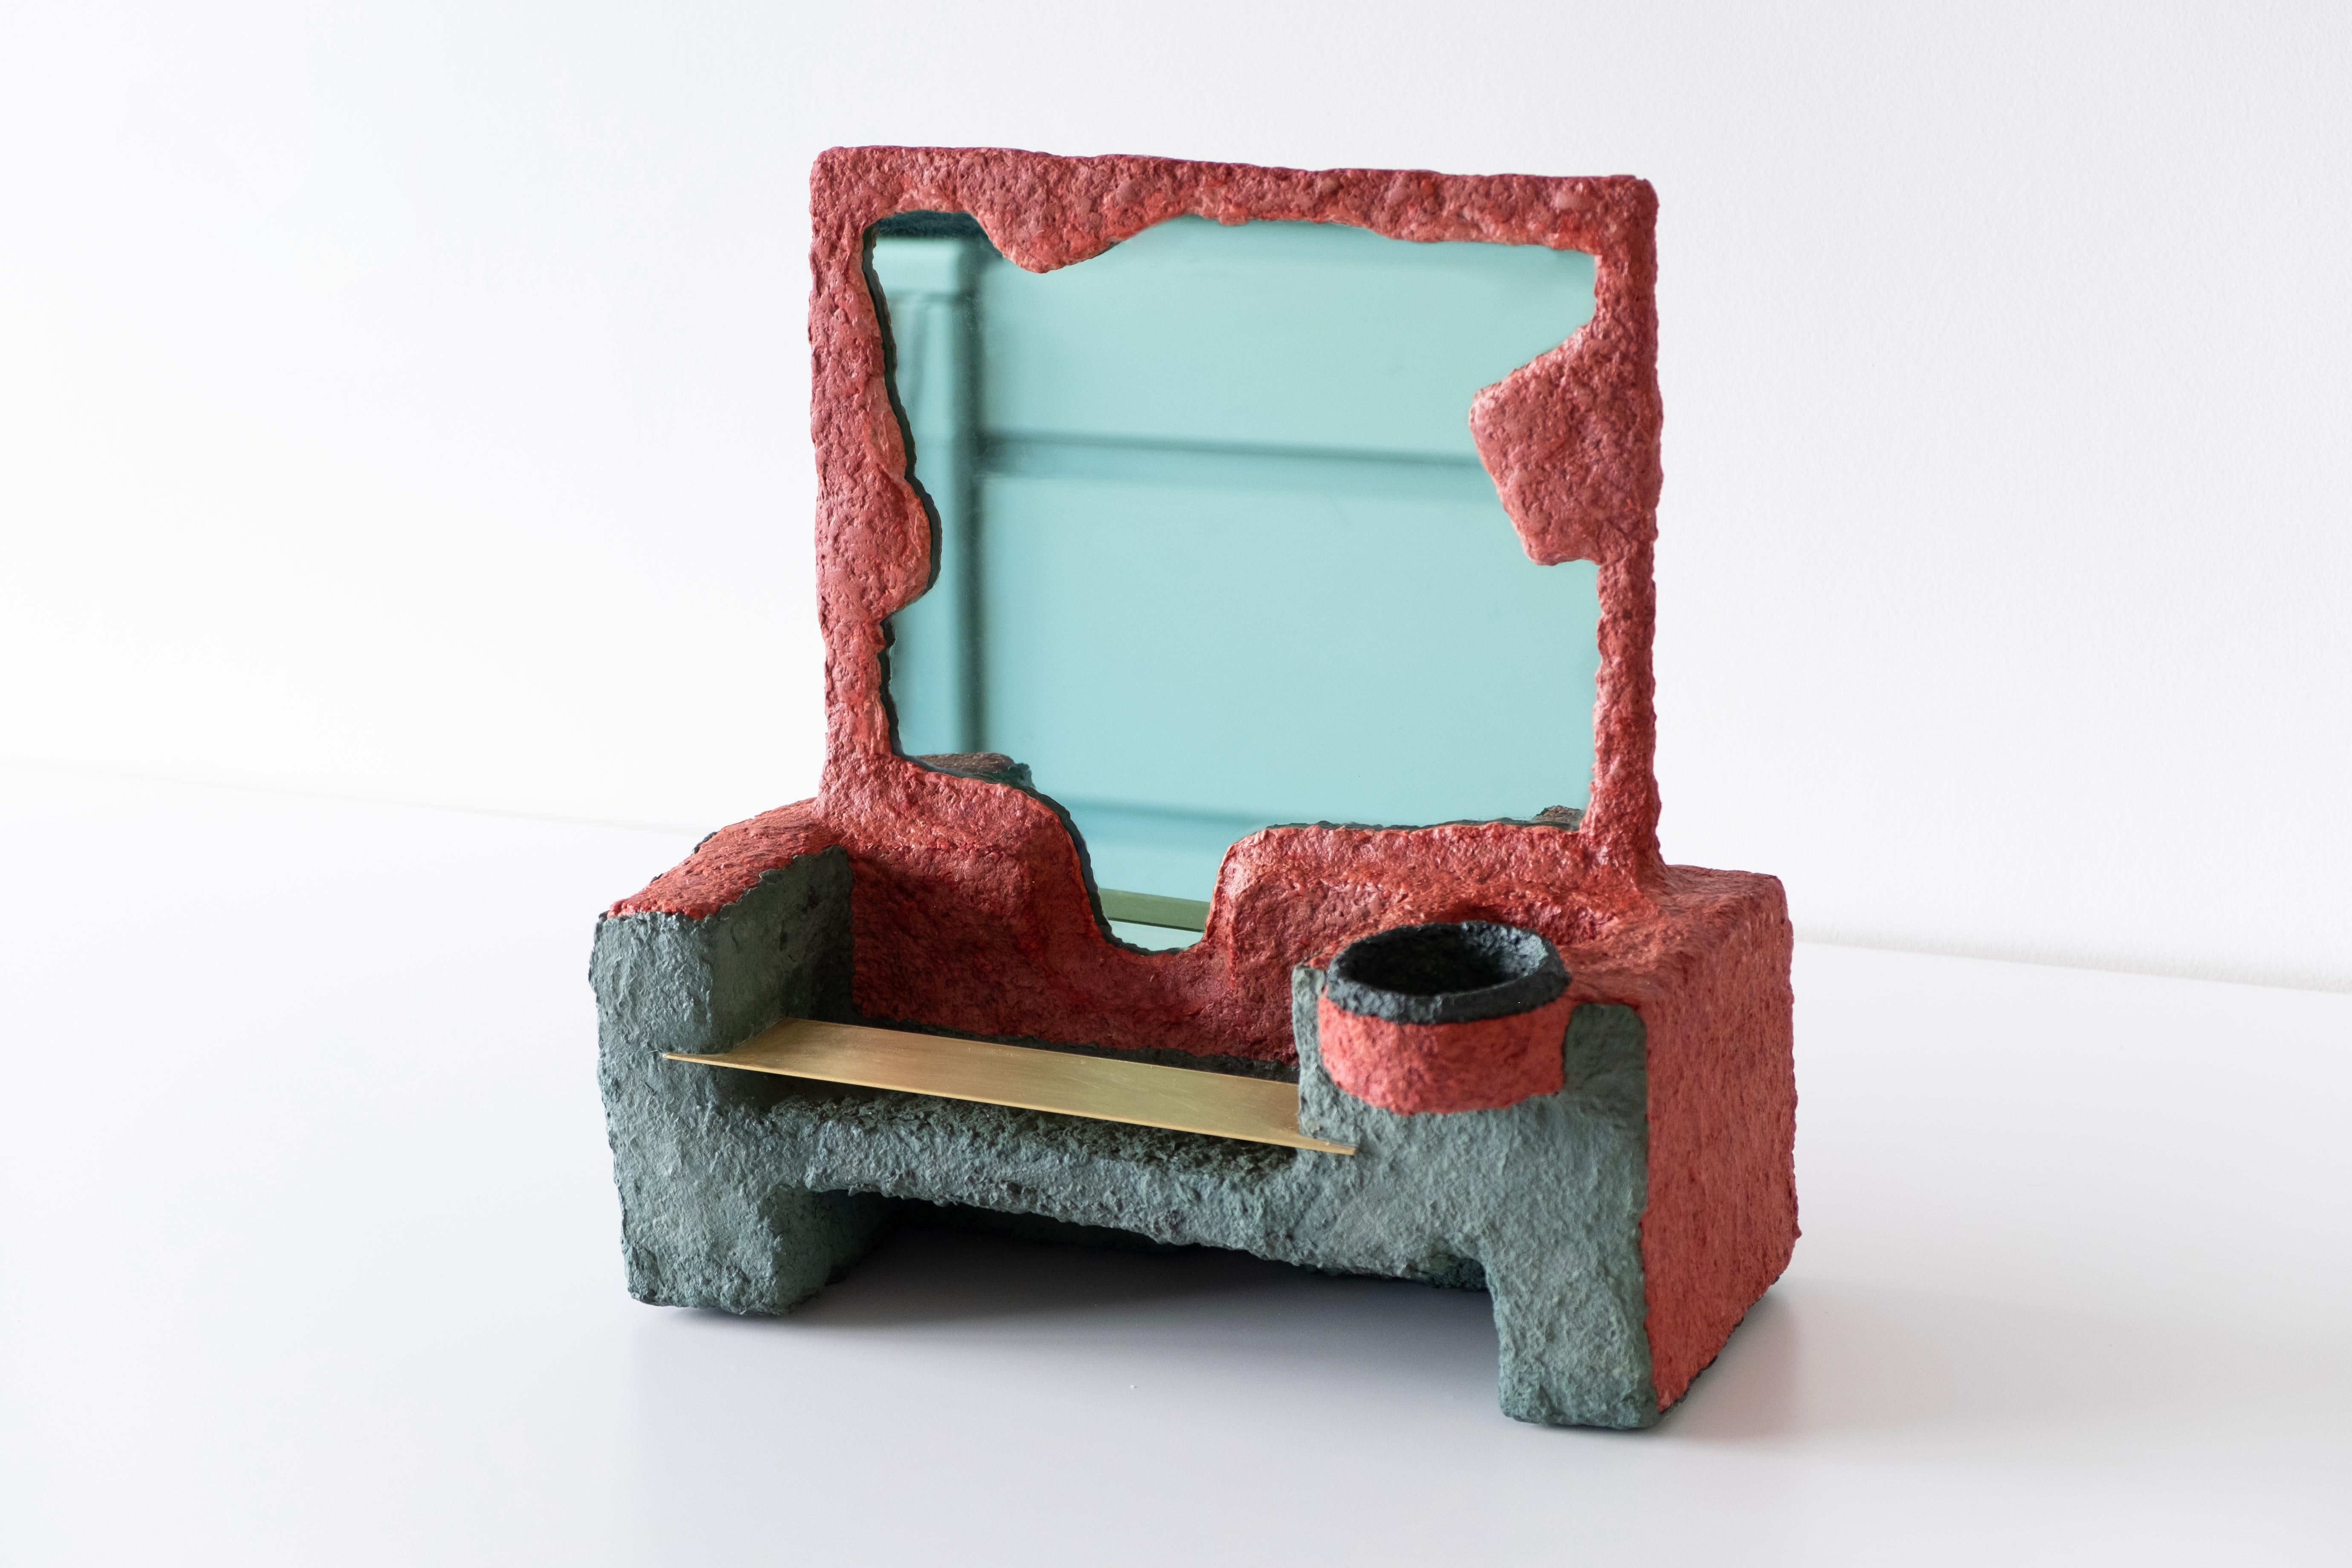 Post-Modern Barbican Mirror No.2 by A Space For Sale